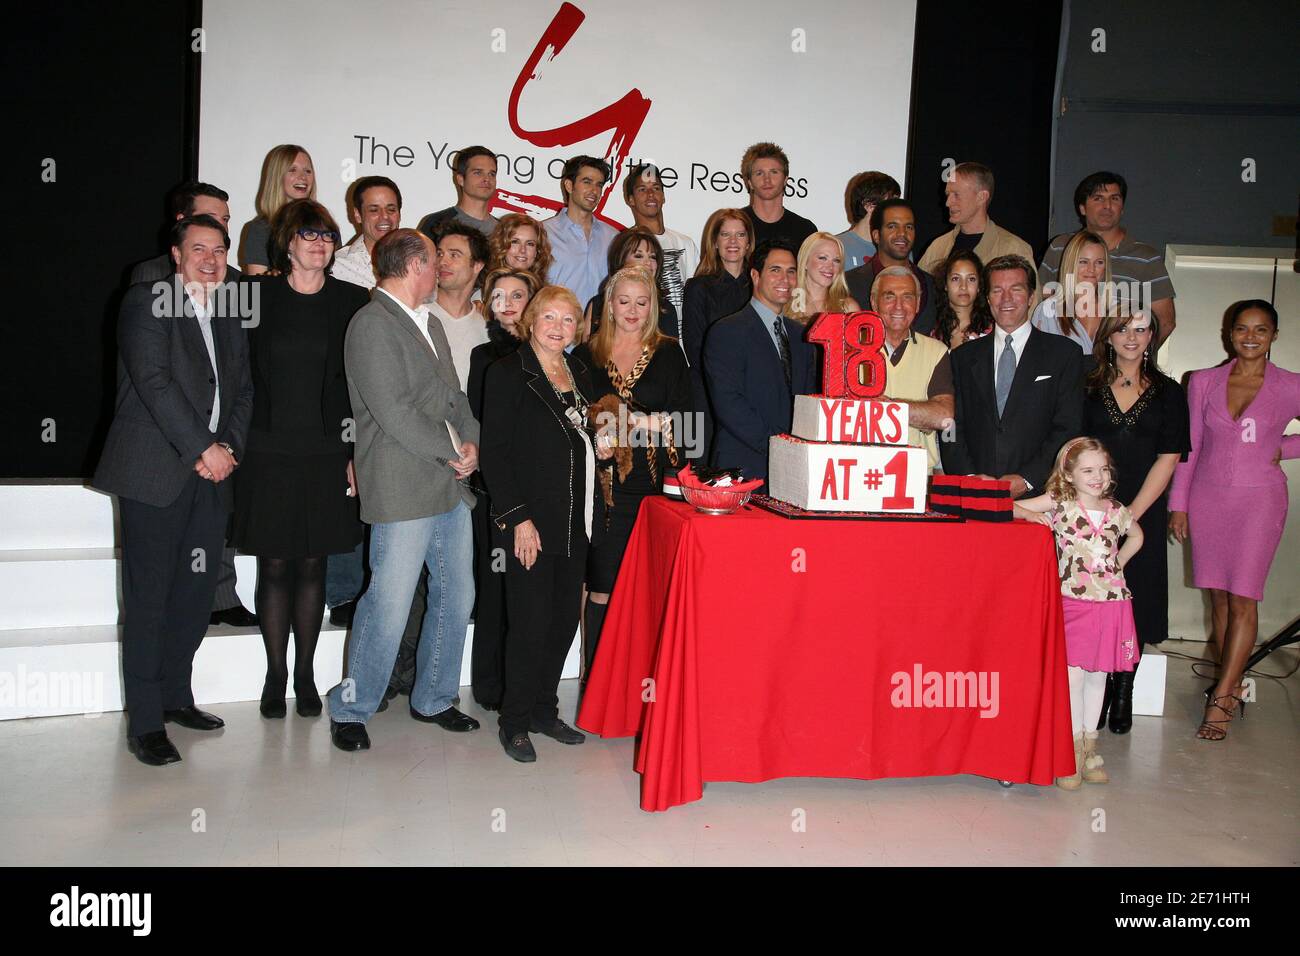 'All the cast of 'The young and the restless' celebrates 18 years on Number 1 on US TV on CBS ; Melody Thomas Scott, Lauralee Bell, Christian Leblanc, Tracey Bregman, Michelle Stafford, Kristoff St John, Ted Shackelford, Adrienne Frantz, Vincent Irizzari, Peter Bergman, Thad Luckinbill etc ... In Los Angeles, CA, USA, on January 8, 2007. Photo by Denis Guignebourg/ABACAPRESS.COM' Stock Photo